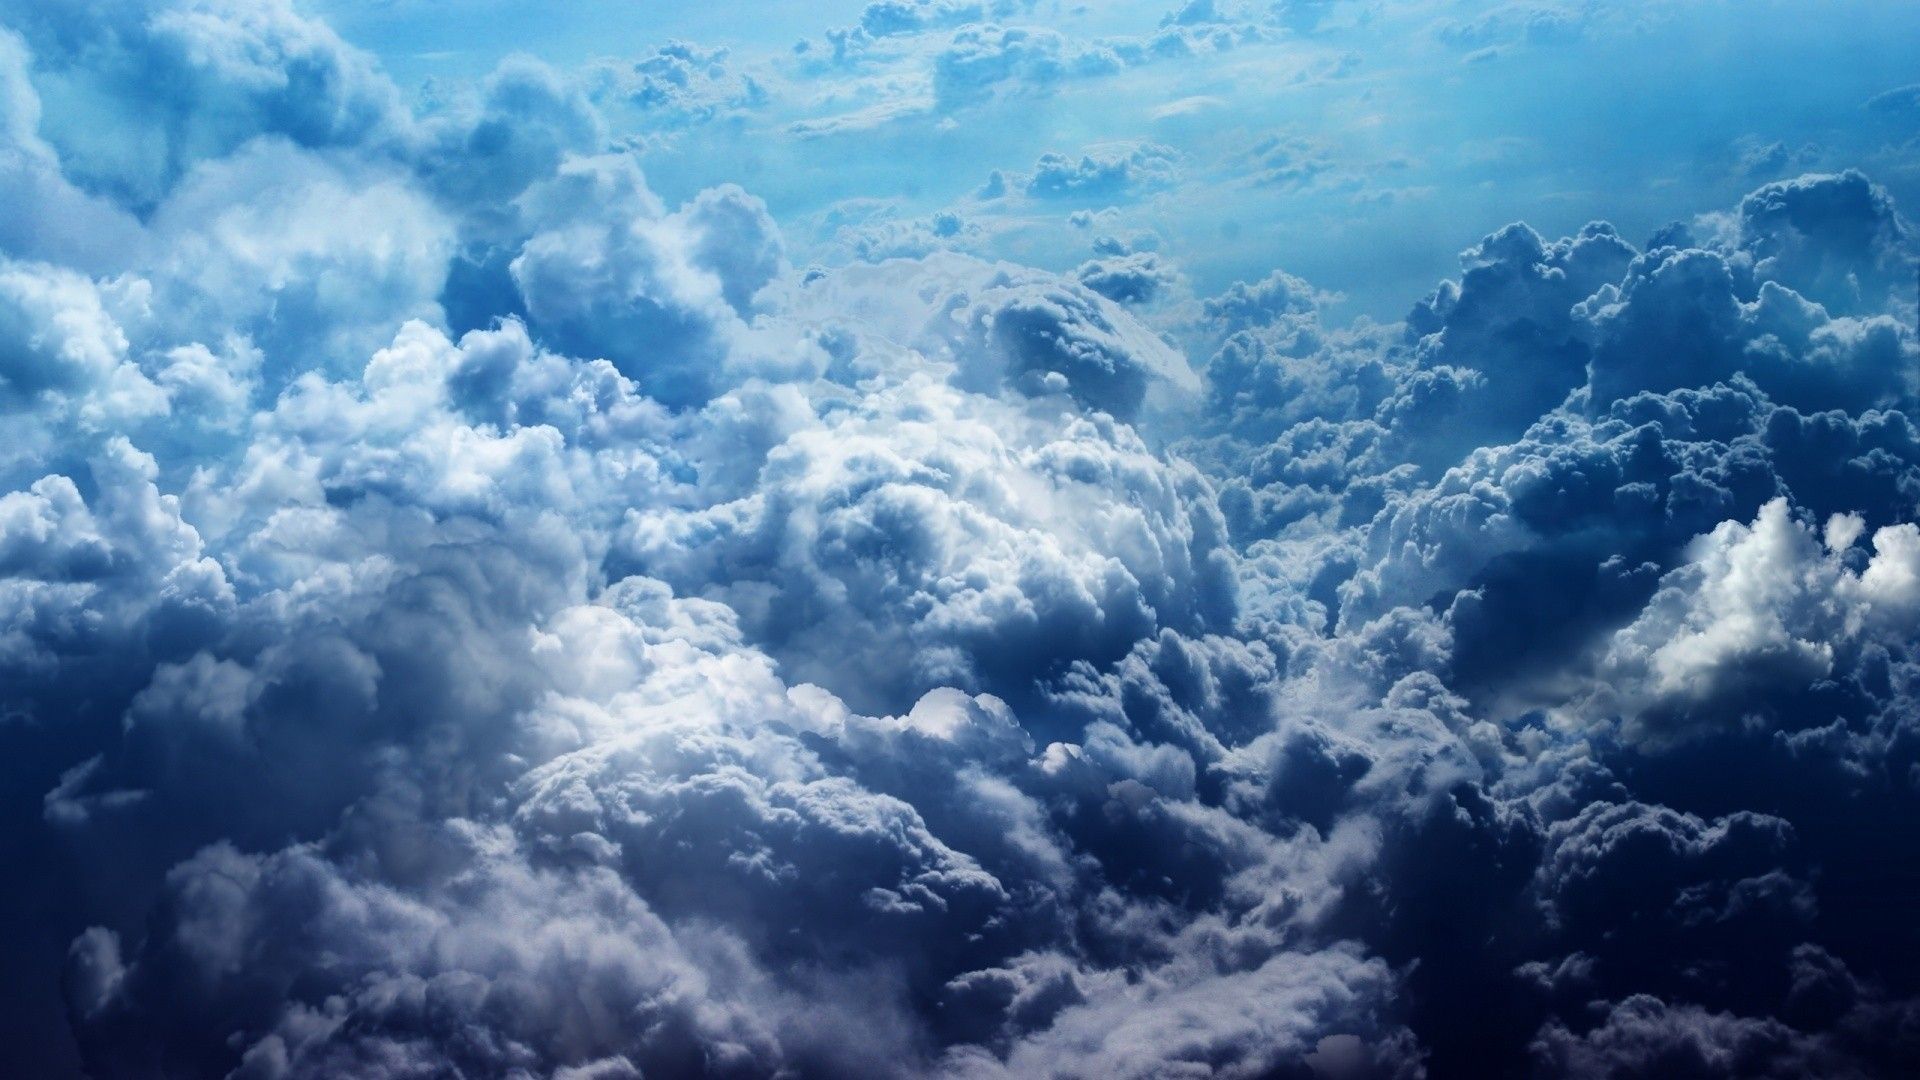 Aesthetic Mac Wallpaper Free Aesthetic Mac Background 2020. Clouds, Sky and clouds, Cloud wallpaper